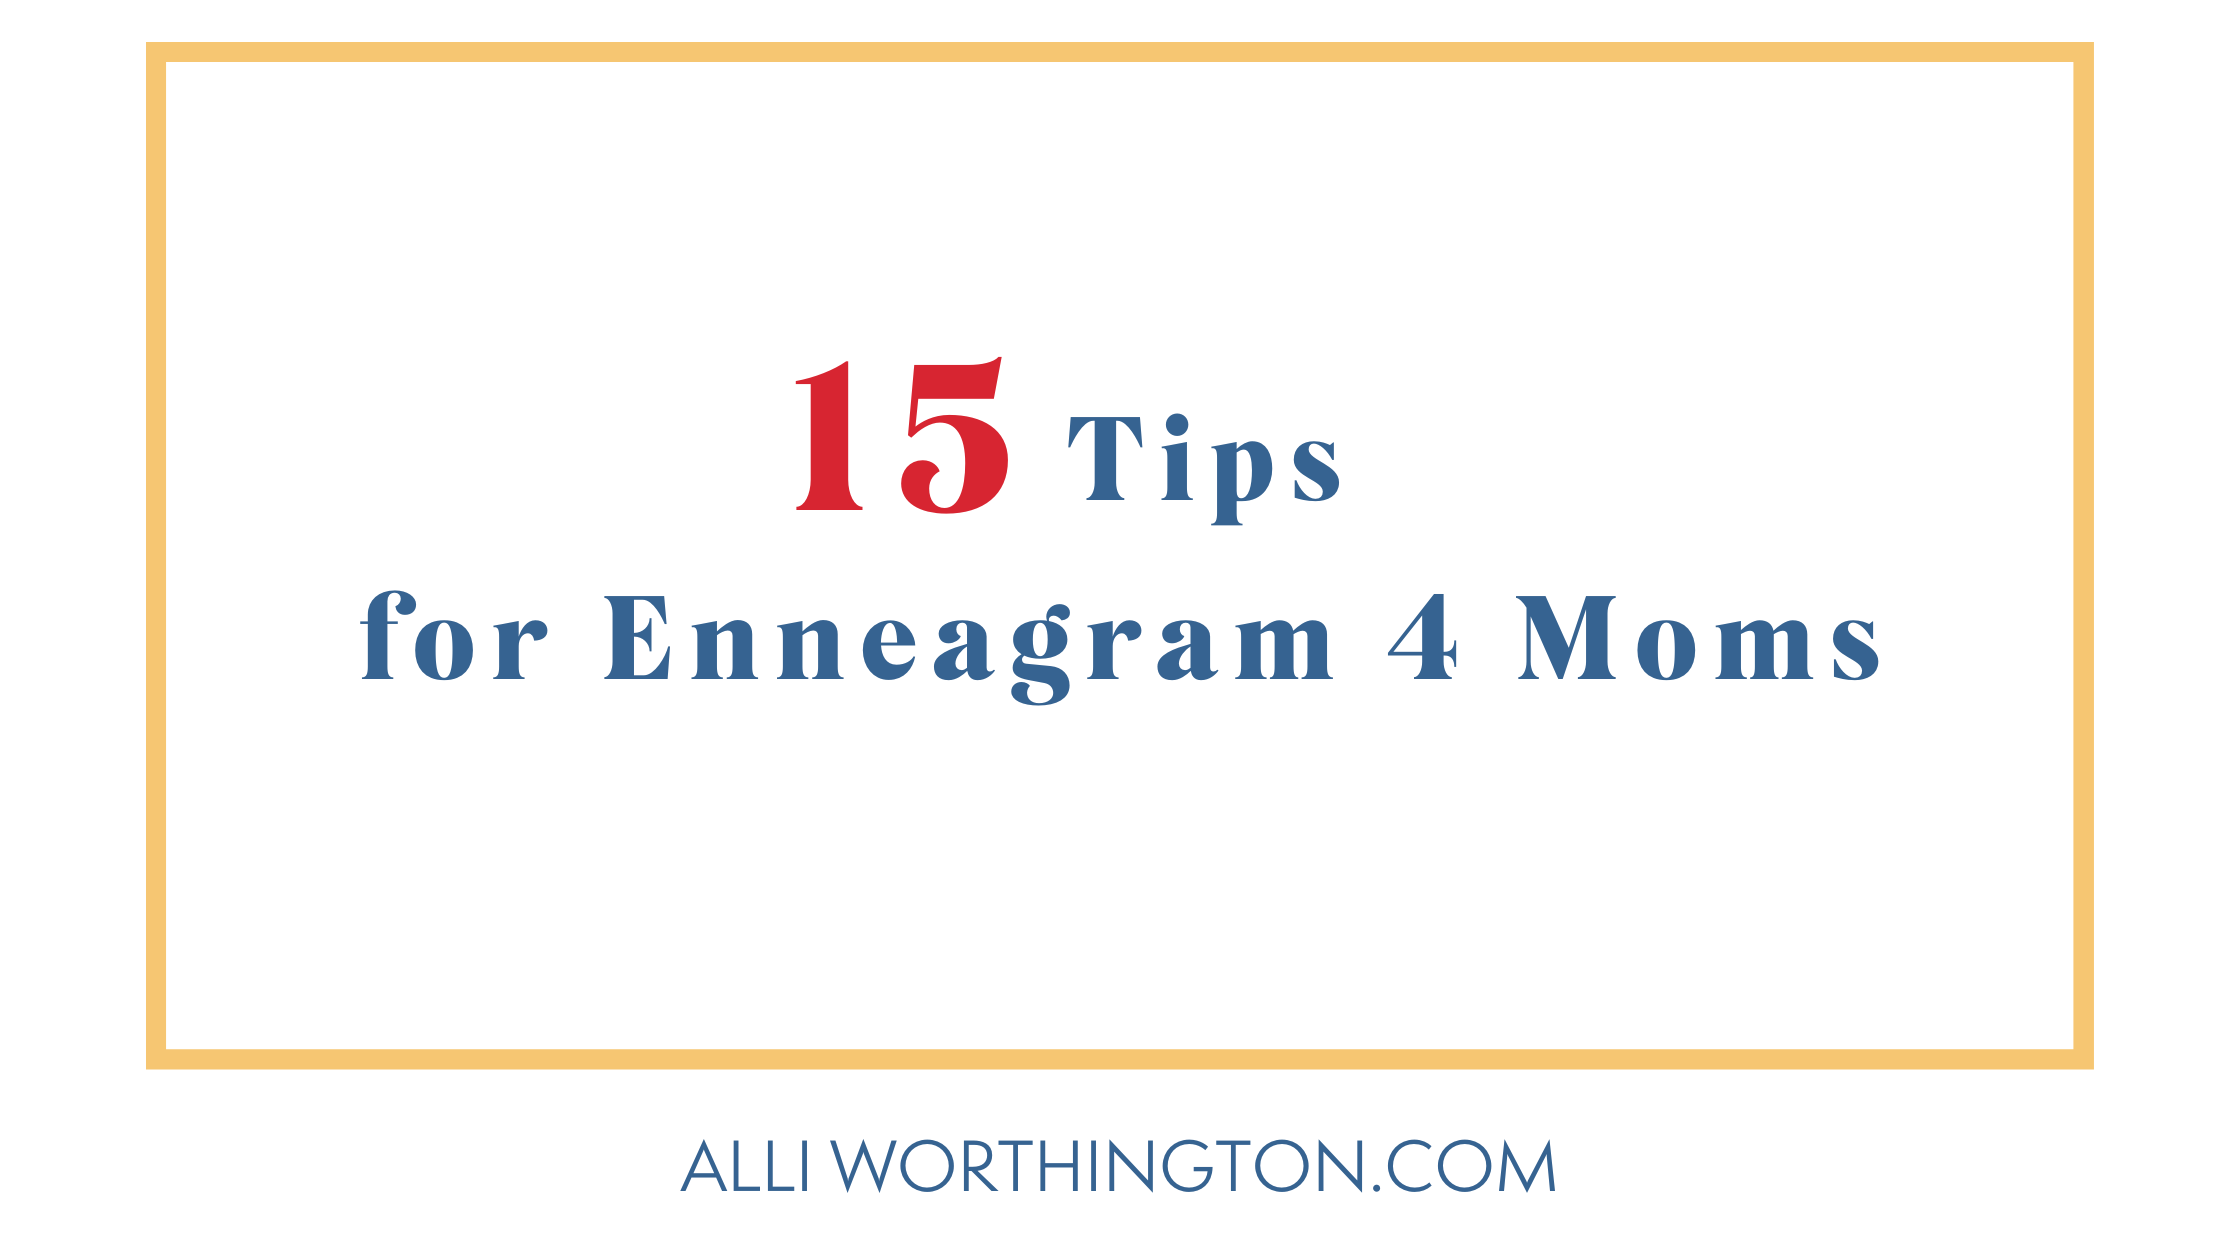 Tips to help enneagram 4 moms thrive